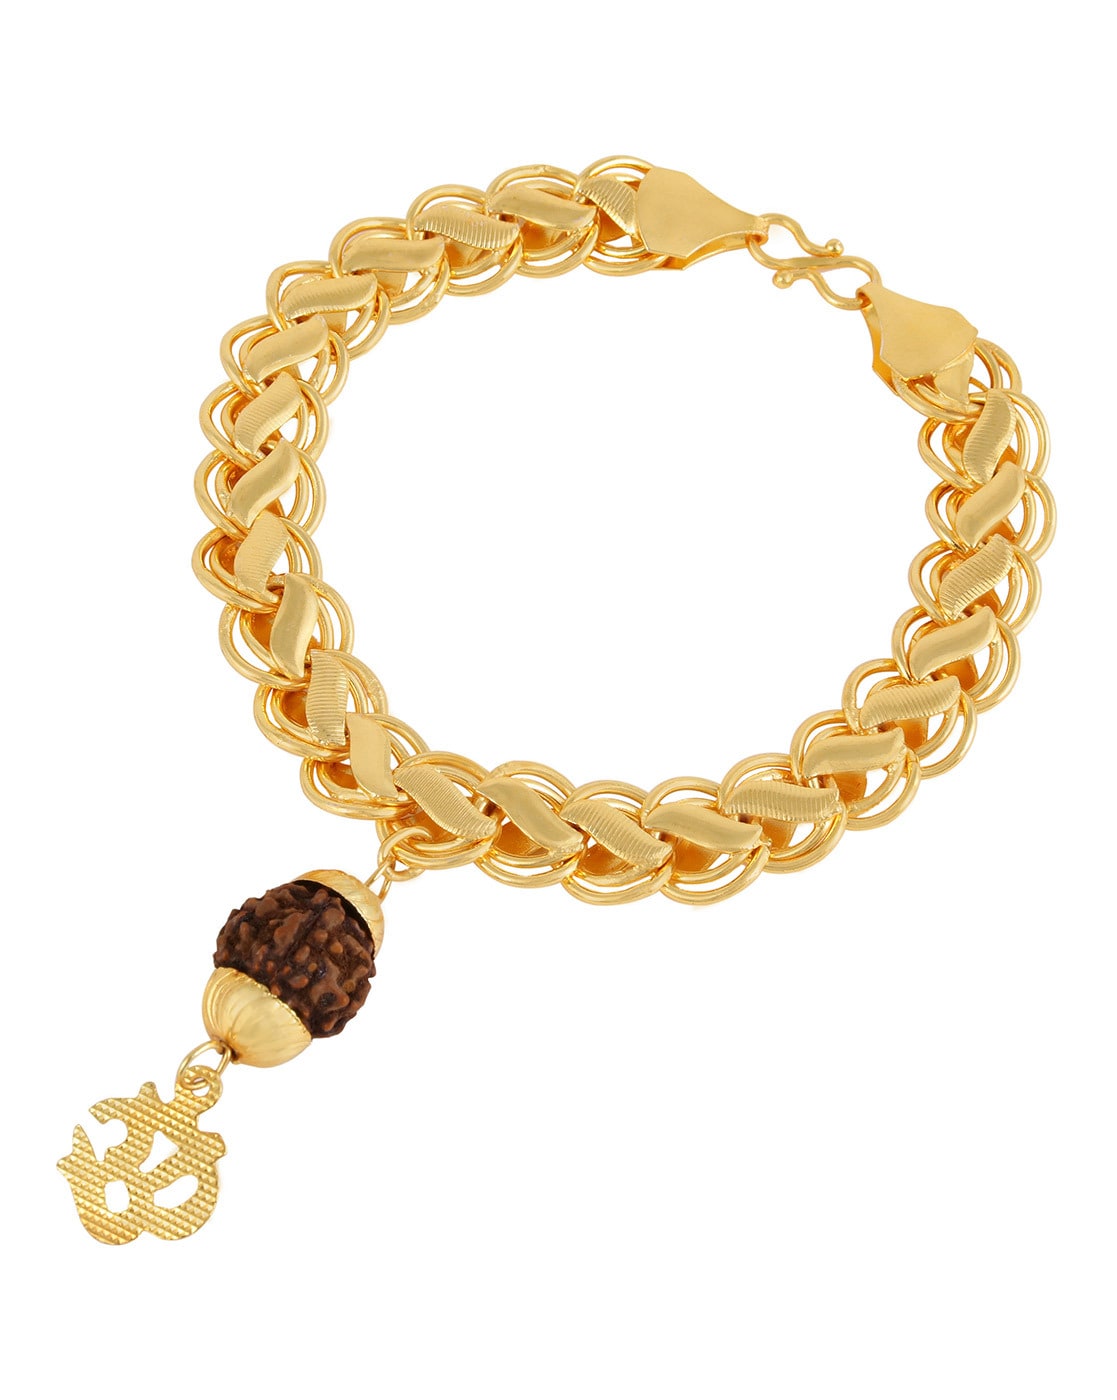 Entwined for Infinity Gold Chain Bracelet  Outhouse Jewellery